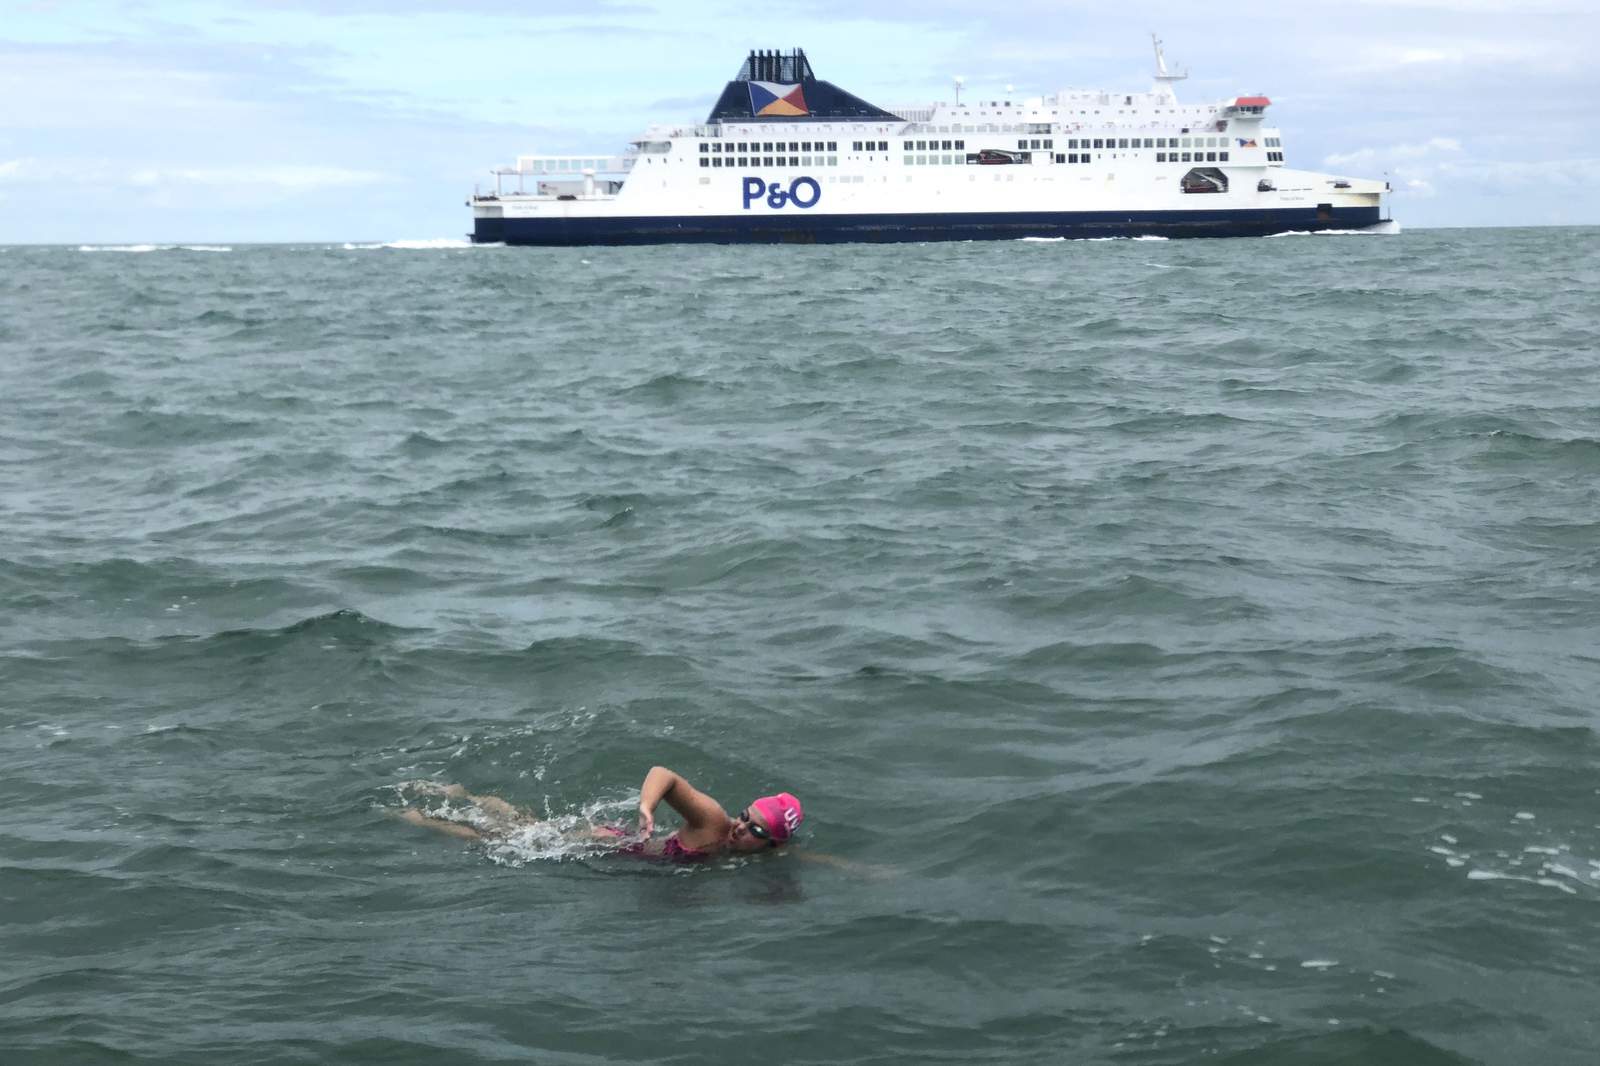 New Hampshire 16-year-old swims across English Channel